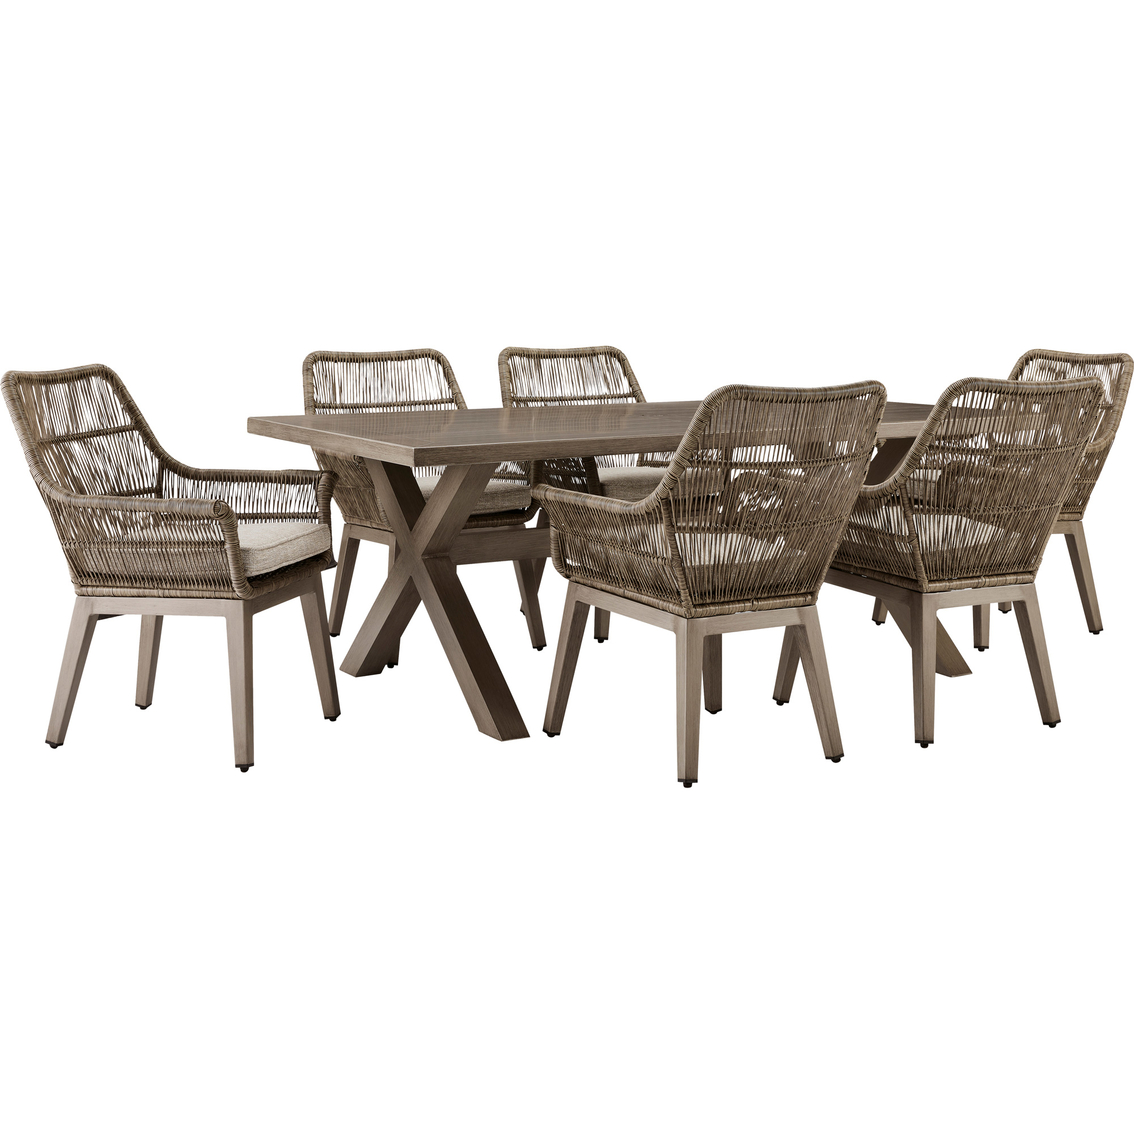 Signature Design by Ashley Beach Front Outdoor Dining Table - Image 5 of 5